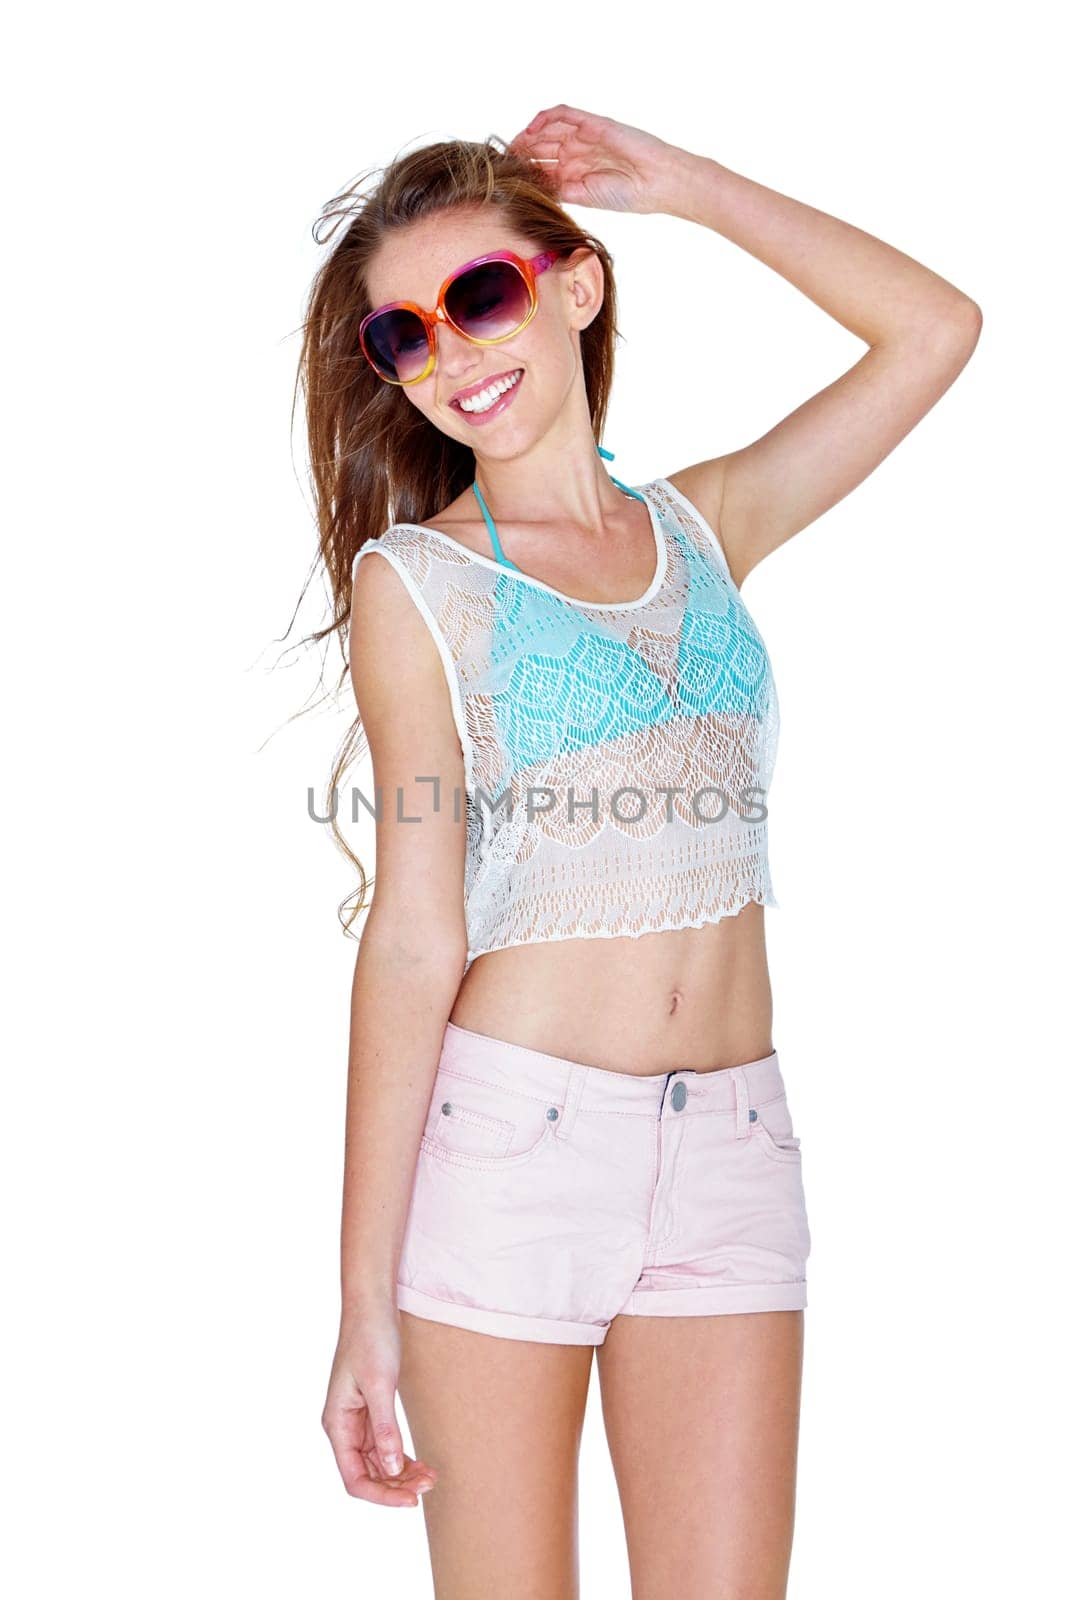 Showing off her summer style. Studio shot of a young woman dressed for summer isolated on white